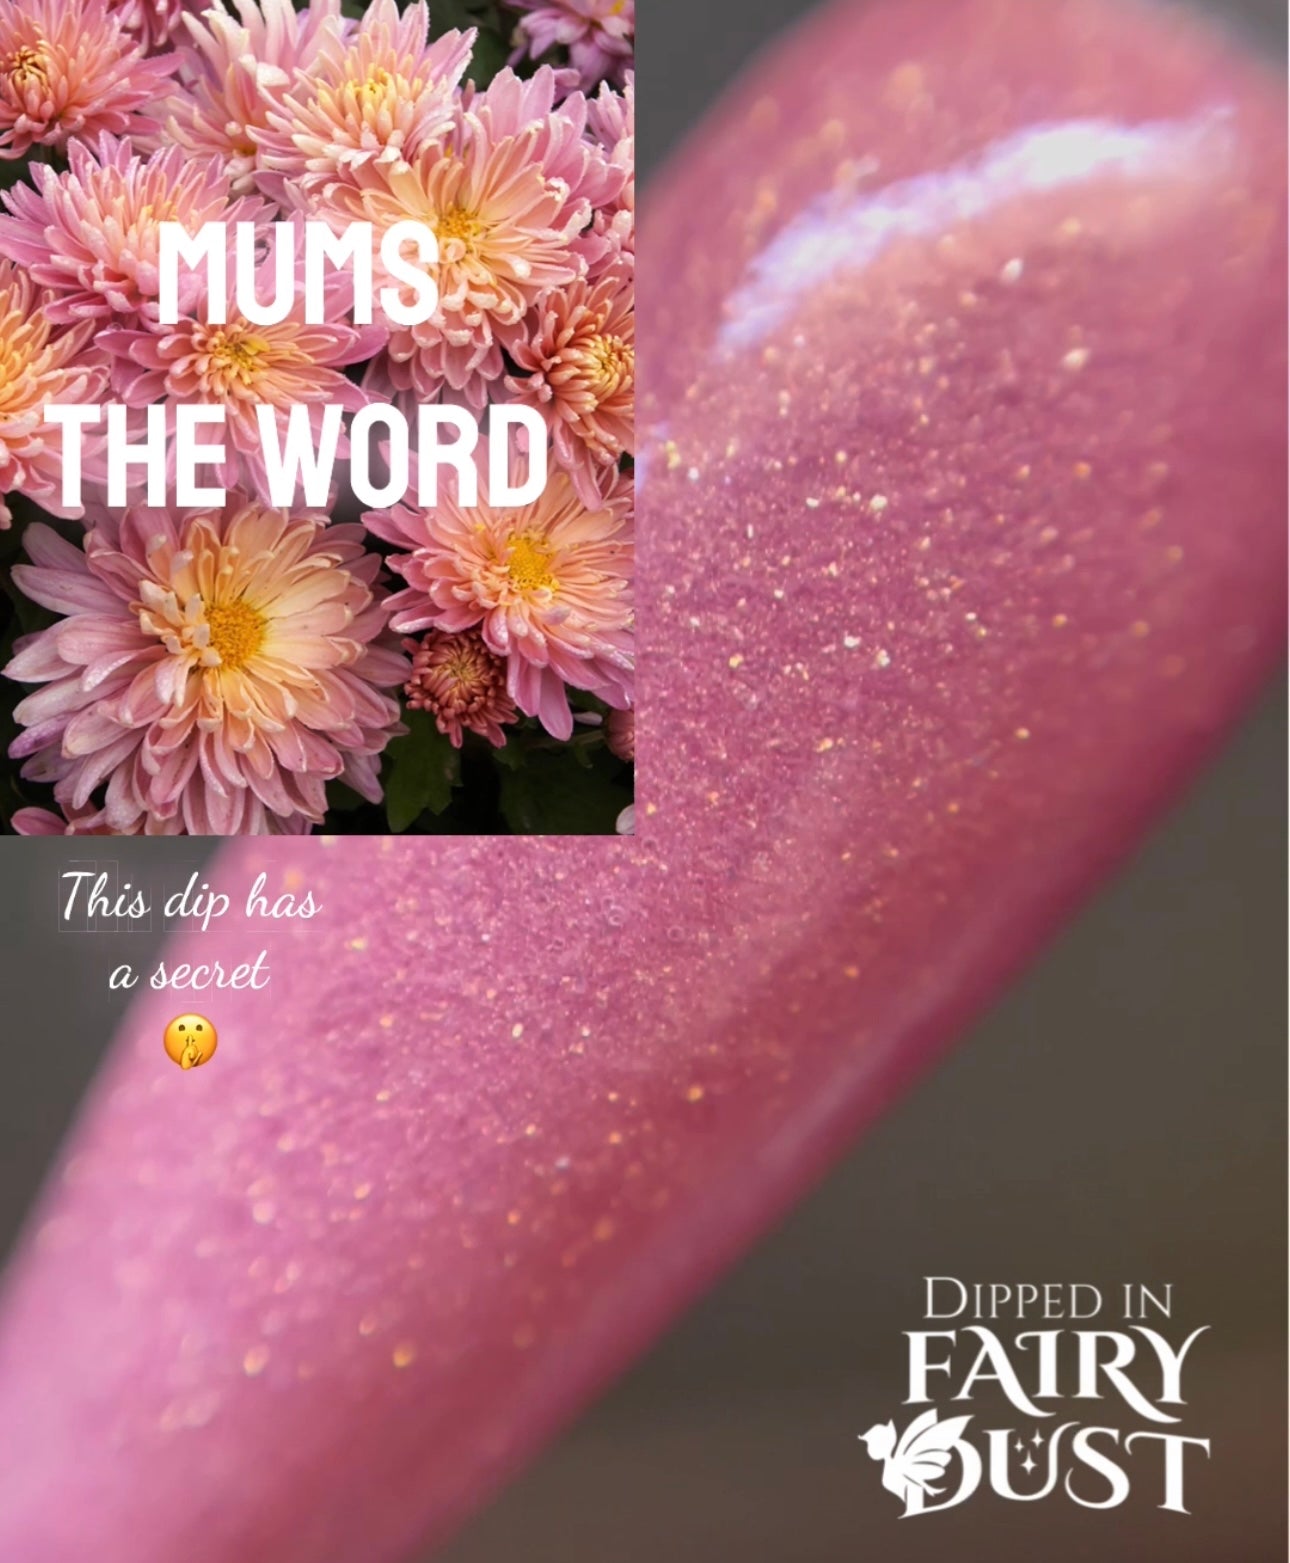 Mums the word